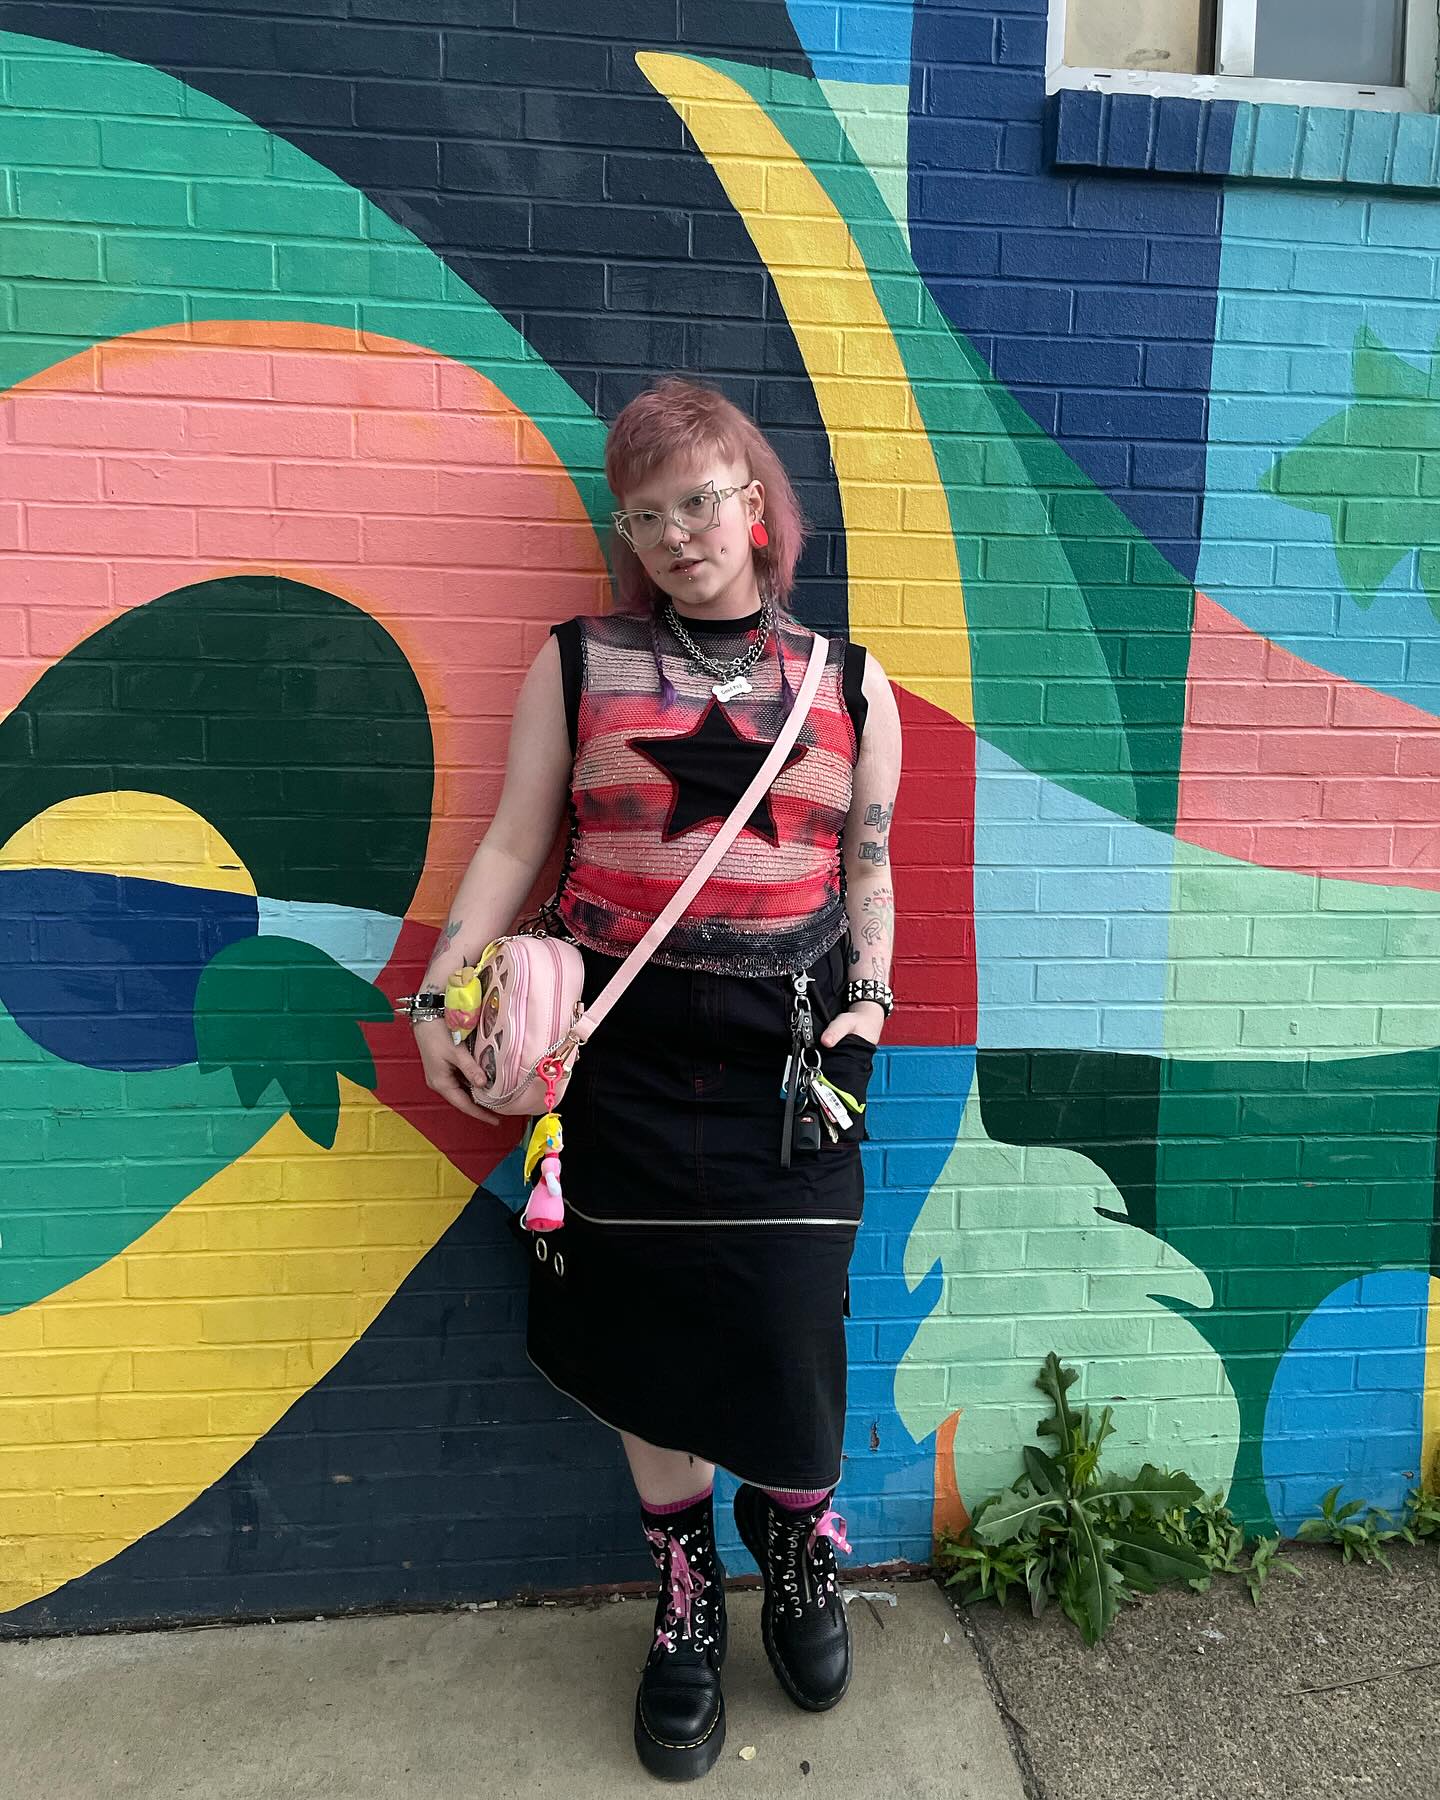 New haircut ✨✨✨ 

Forever hating how BLONDE my natural hair is 😭 but I’m dying it today so!! Stay tuned!! 🫣

Haircut by the lovely @rebelrazorpgh 🖤

Skirt- @hottopic 
Dog tag- @mrsethcorbin 
Bag- @sleepingwolvesart 
Shoes- @drmartensofficial